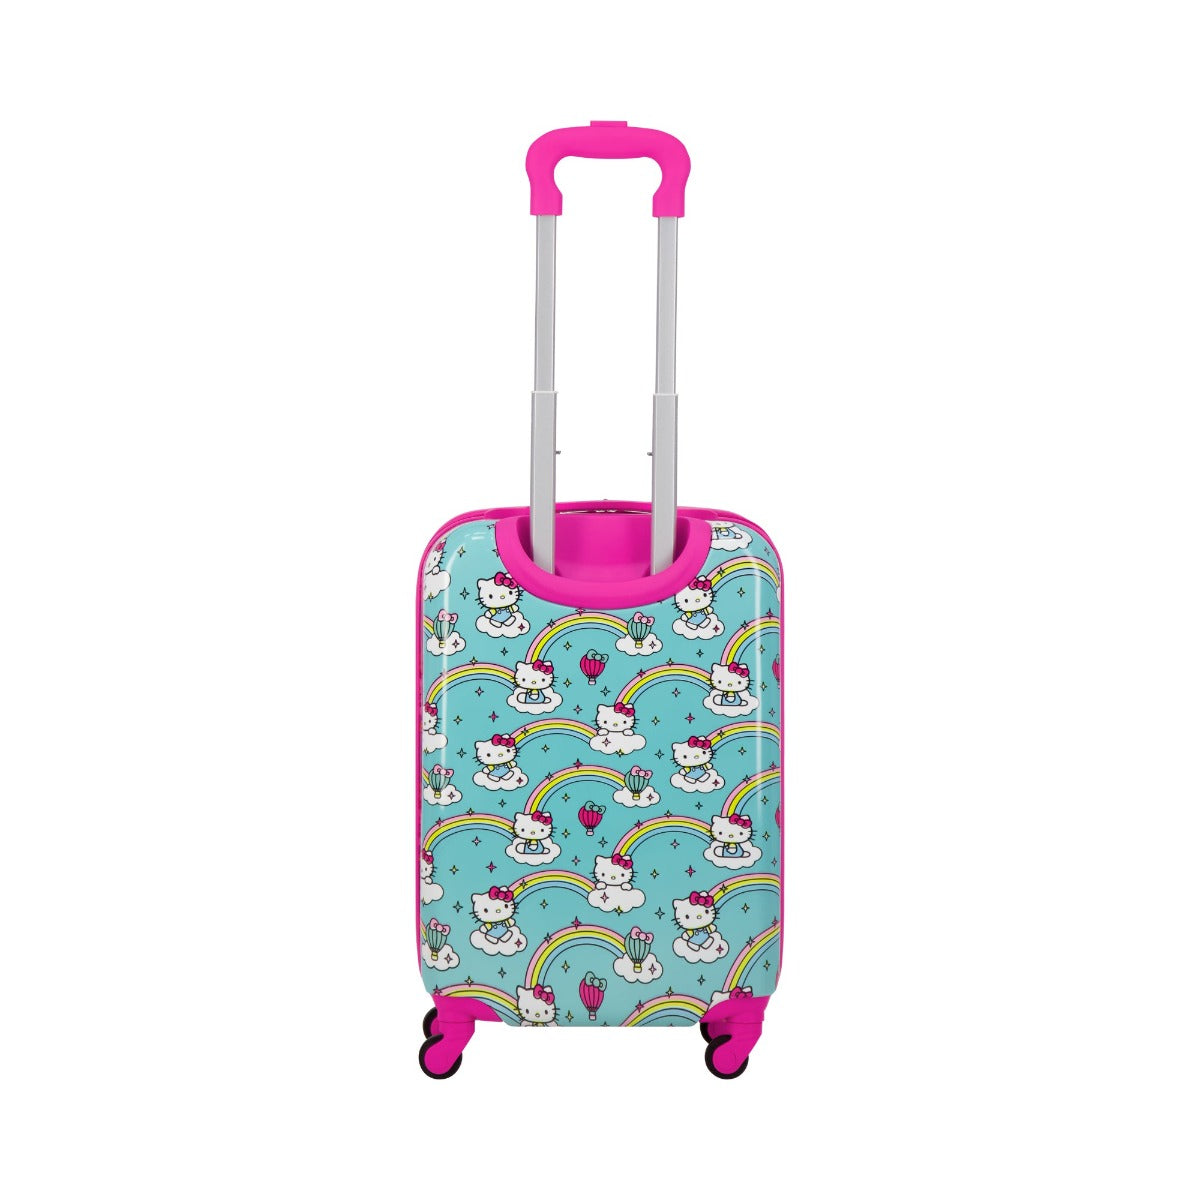 Hello Kitty Ful Rainbows matching 2 piece set - 21" carry-on luggage for kids